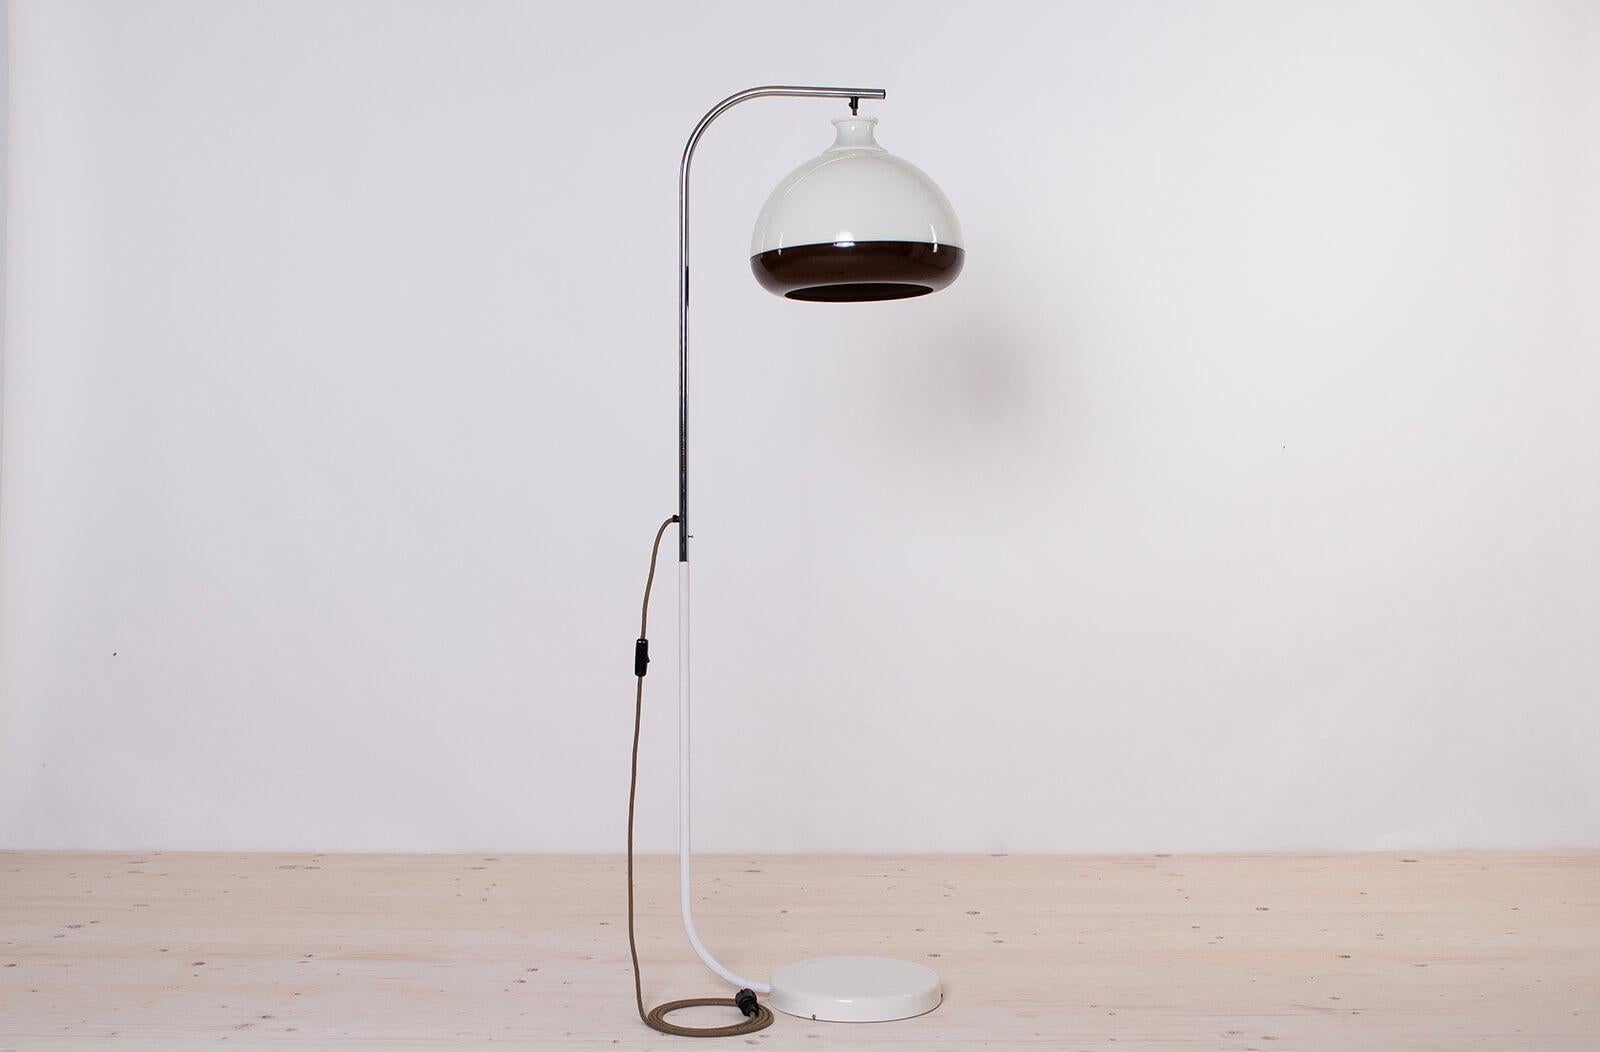 This space age floor lamp hails from Hungary and was made around 1960s, embodying both history and style. It is preserved in good original condition. While the cable has been upgraded with a new one, it seamlessly retains the 1960s vibe with a gray